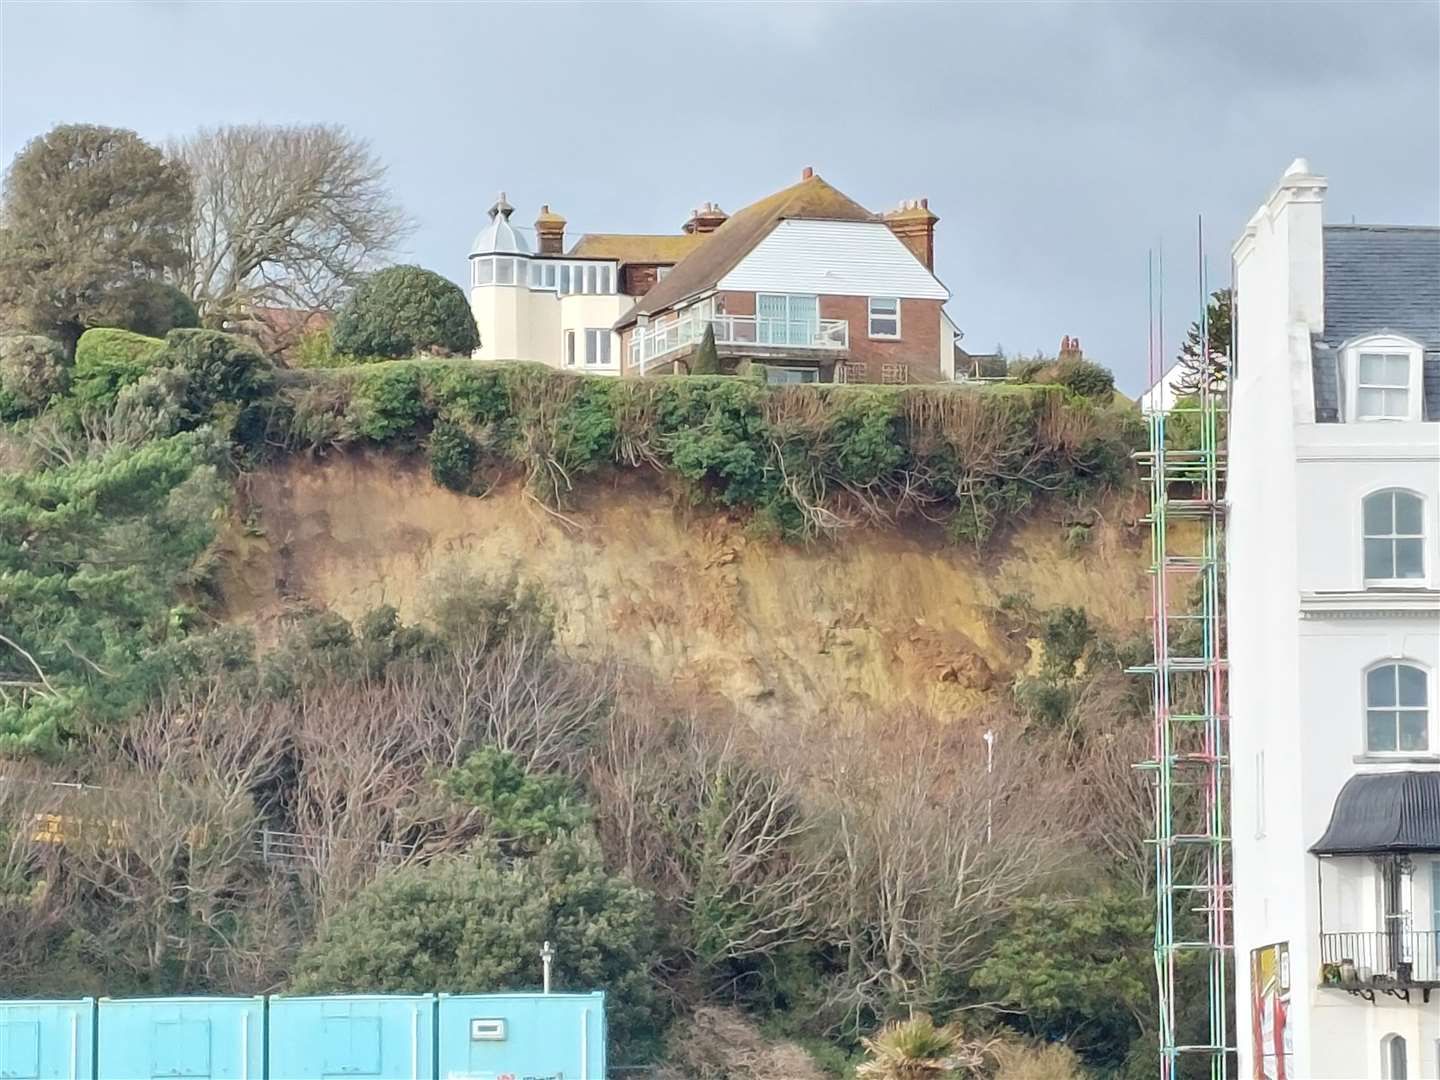 The second landslip along the Road of Remembrance in Folkestone saw trees tumble from beneath a clifftop house